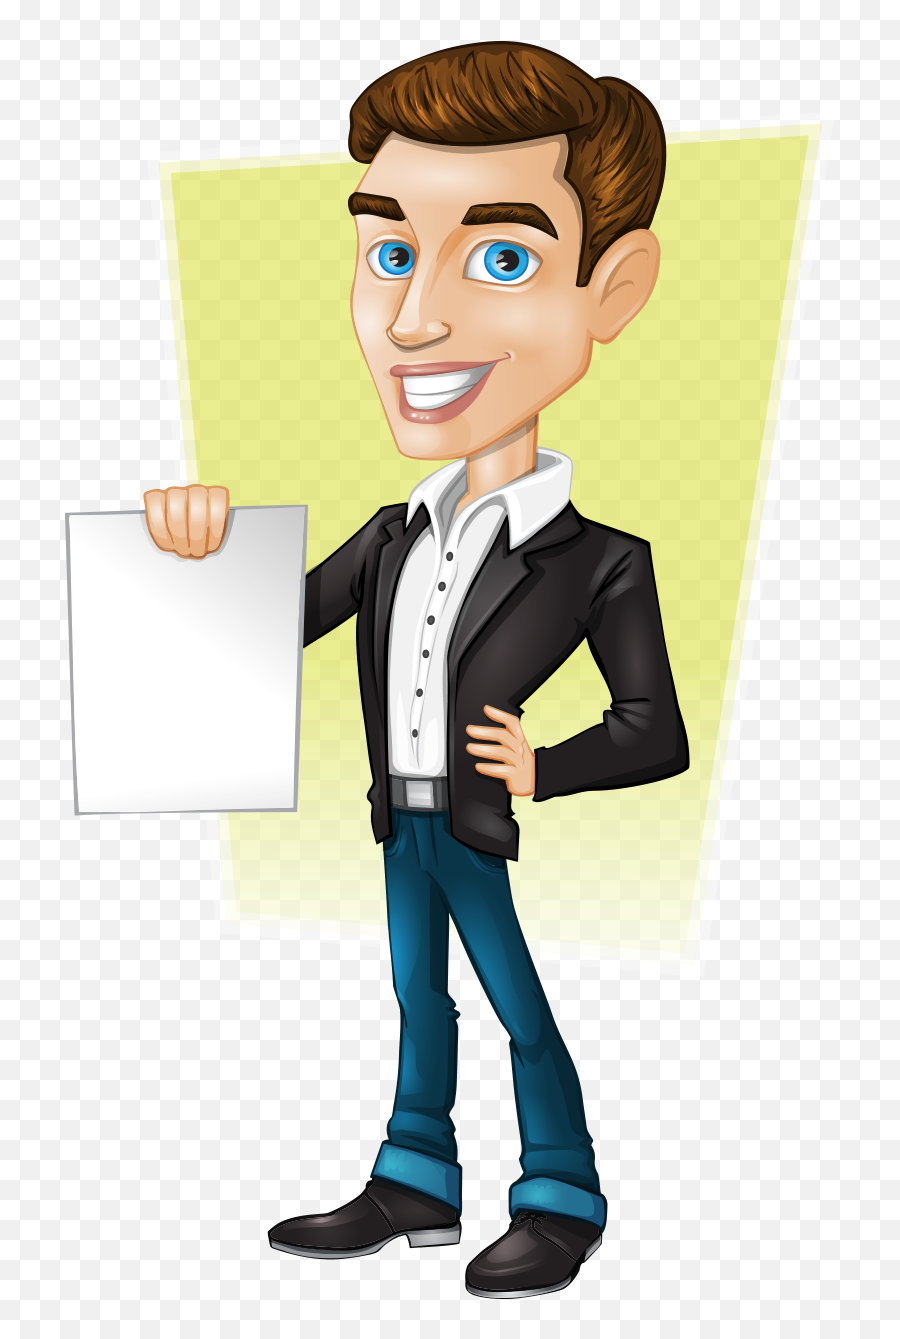 Angry Person Png - Man Vector Handsome Animated Business Black Suit Man In A Suit Cartoon Emoji,Business Man Png